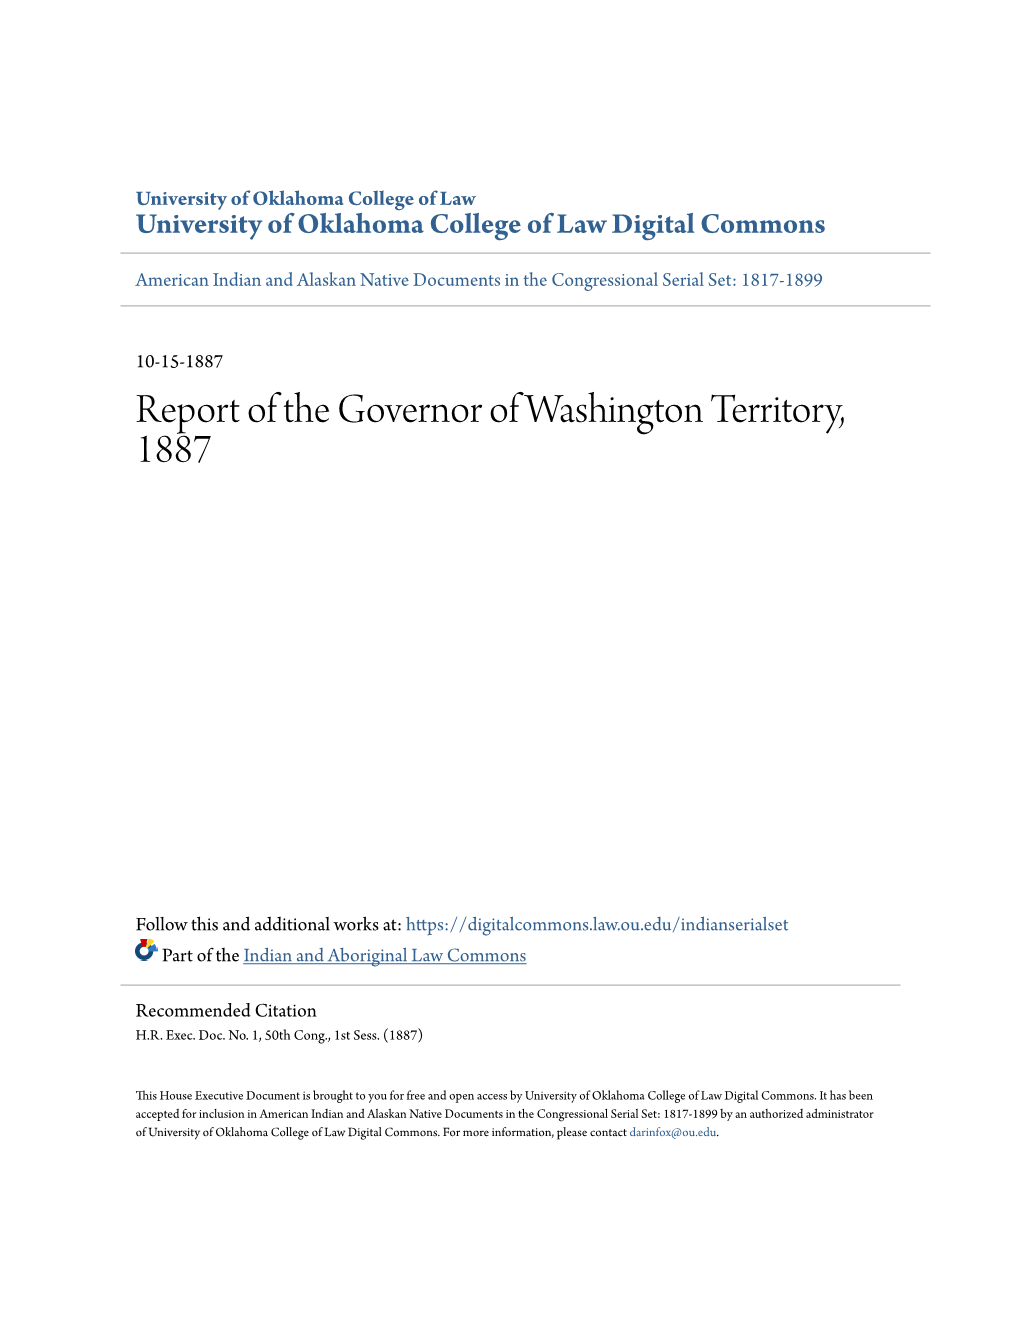 Report of the Governor of Washington Territory, 1887